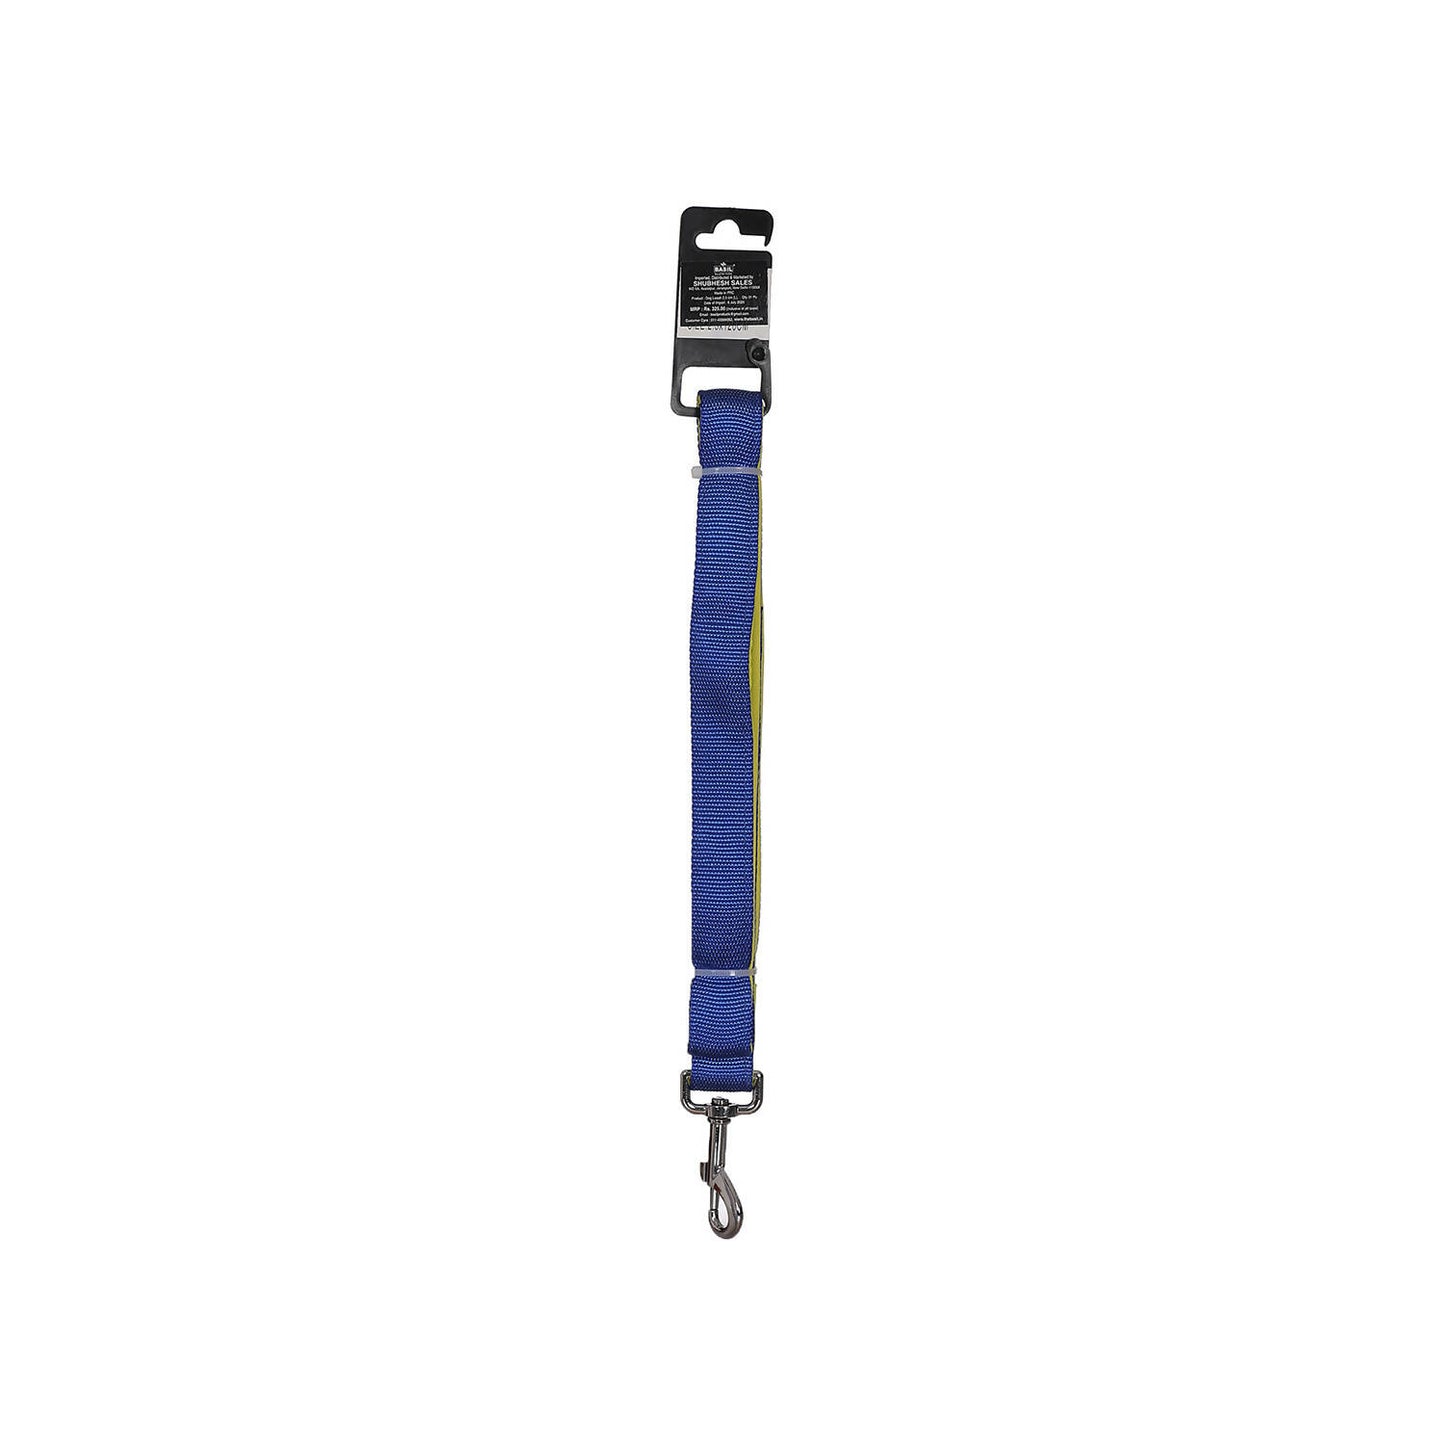 Basil - Padded Leash For Dogs